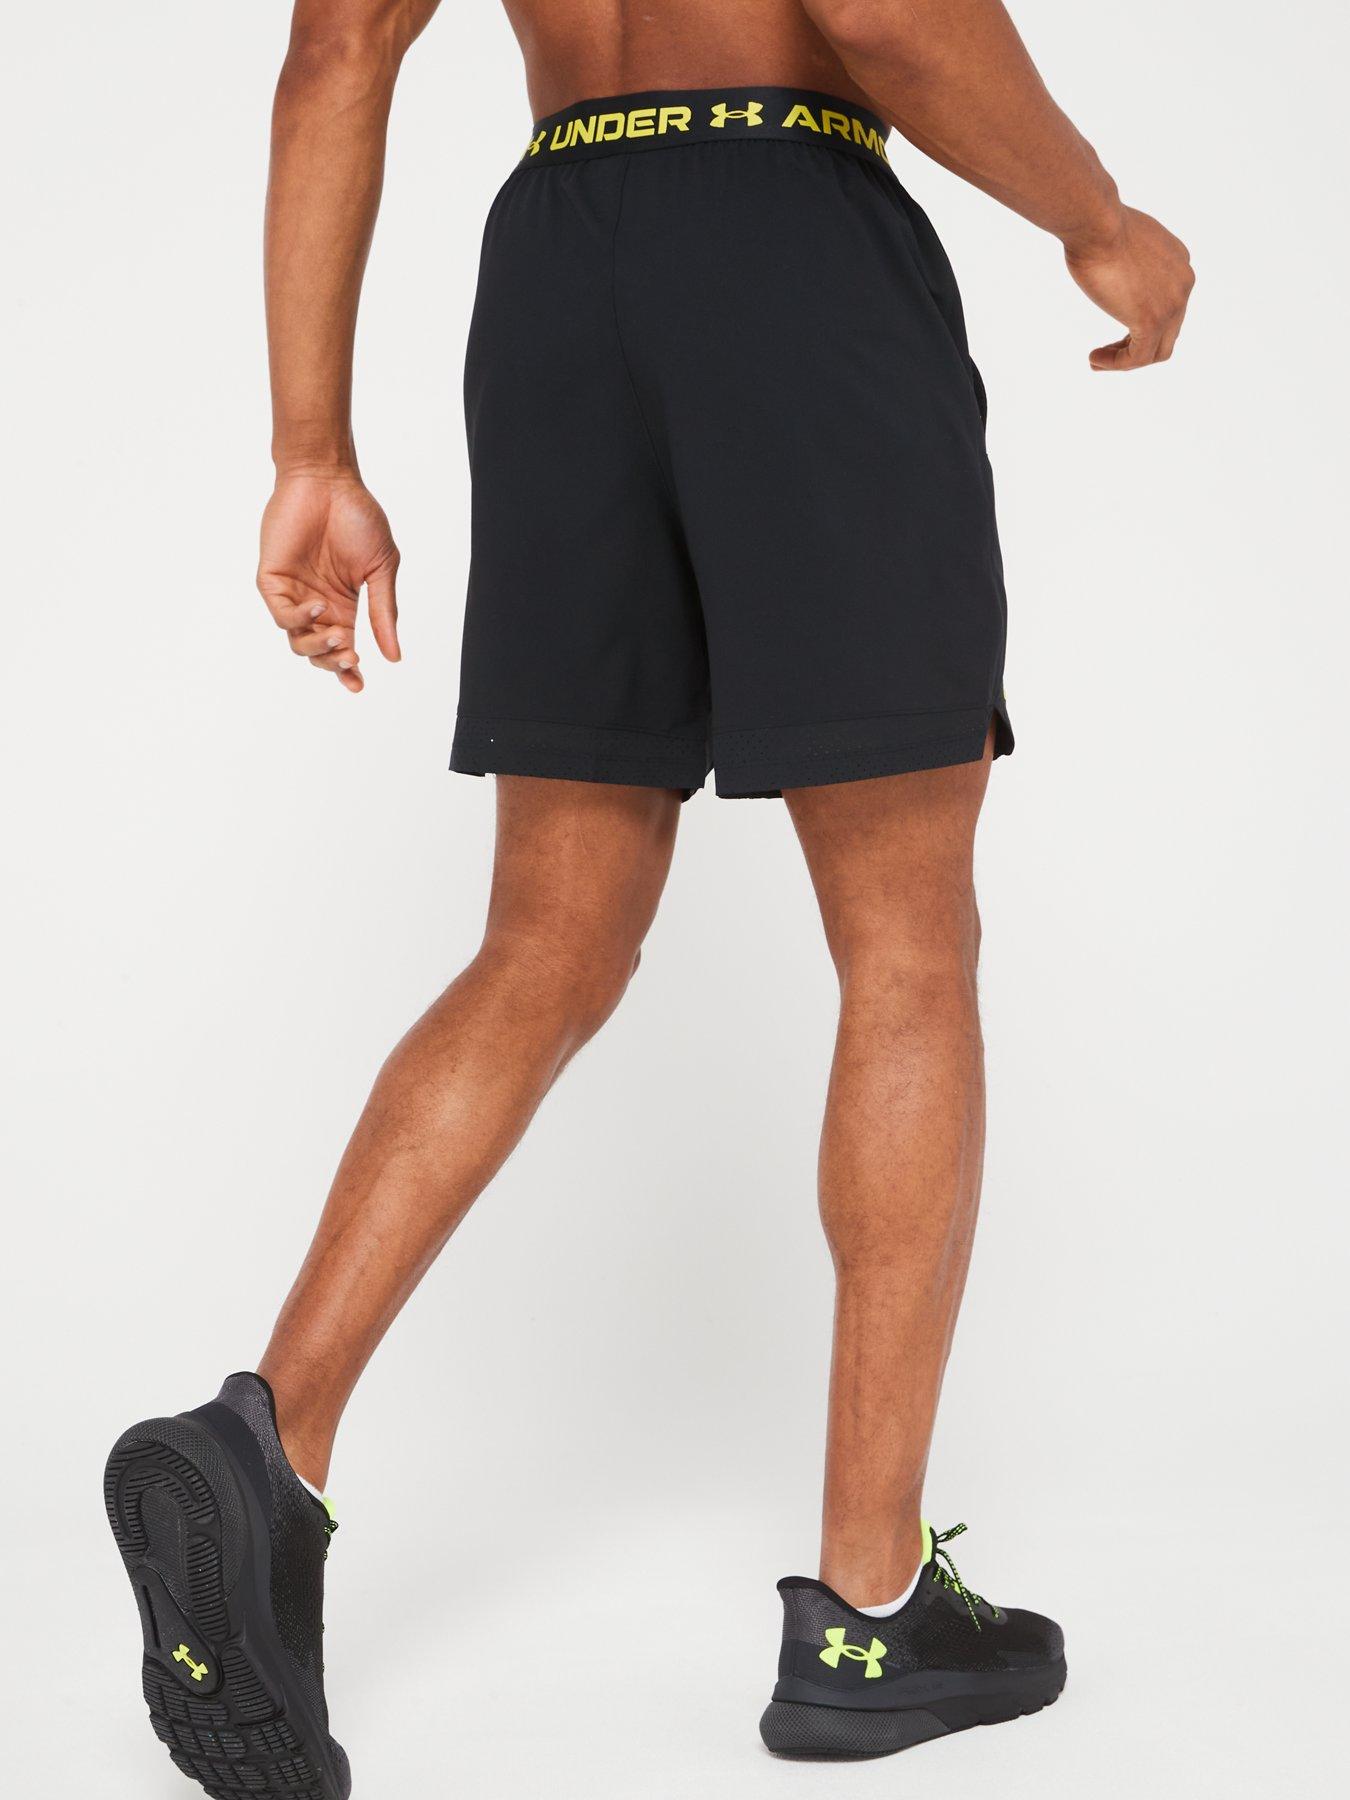 Under Armour Mens HIIT 6 Shorts – More Sports